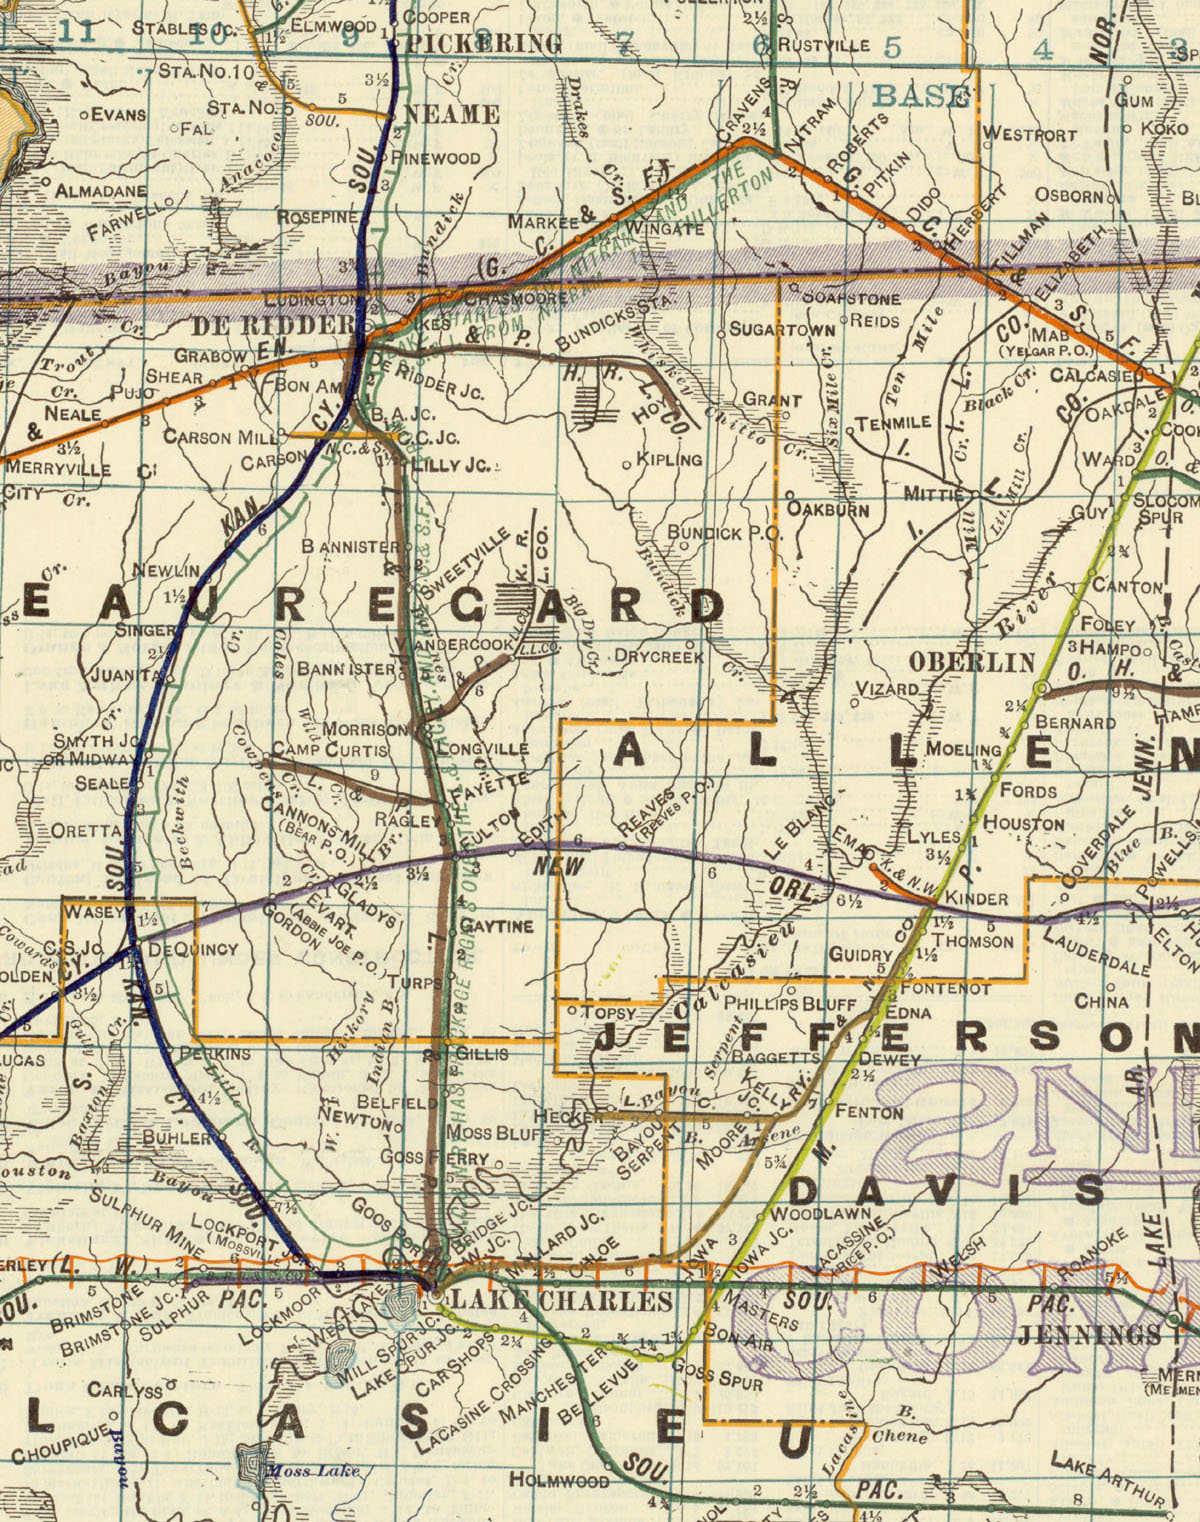 Lake Charles & Northern Railroad Company (Calcasieu and Beauregard Parishes, La.), Map Showing Route in 1922.